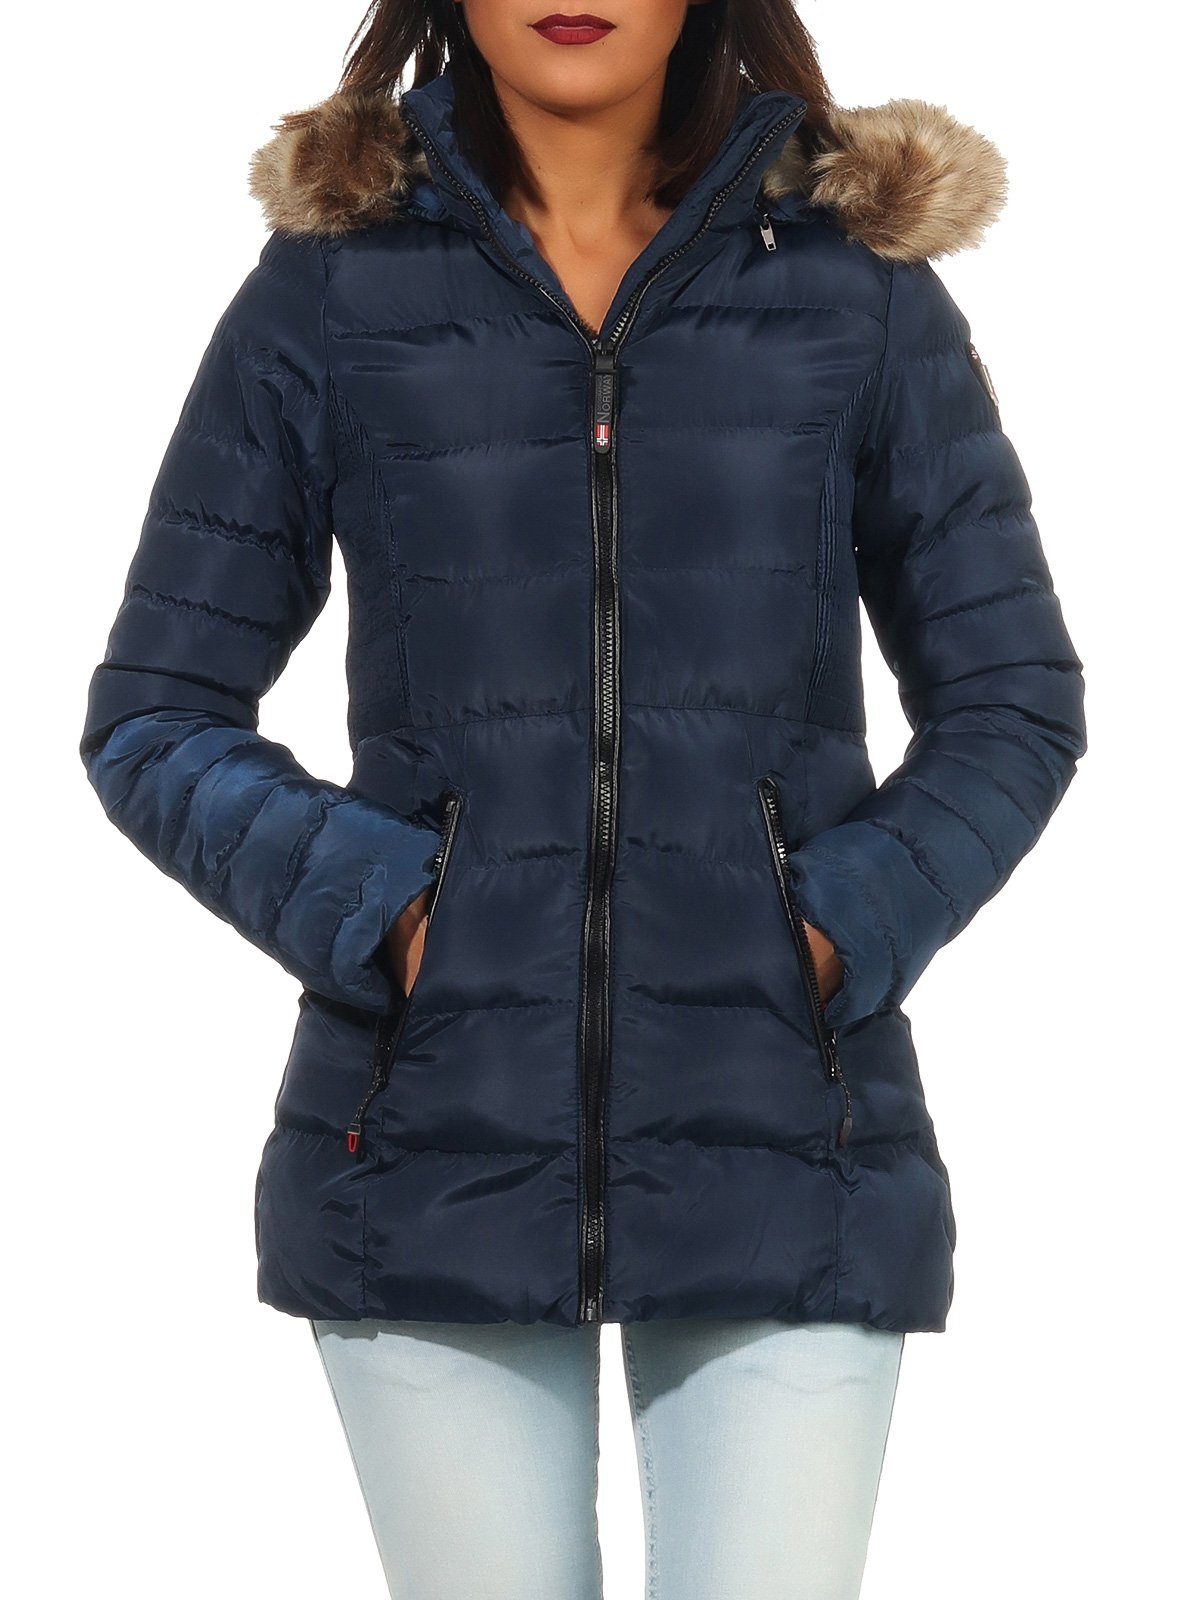 Geographical Norway Winterjacke G-Anella by leyoley mit abnehmbarer Kapuze Navy